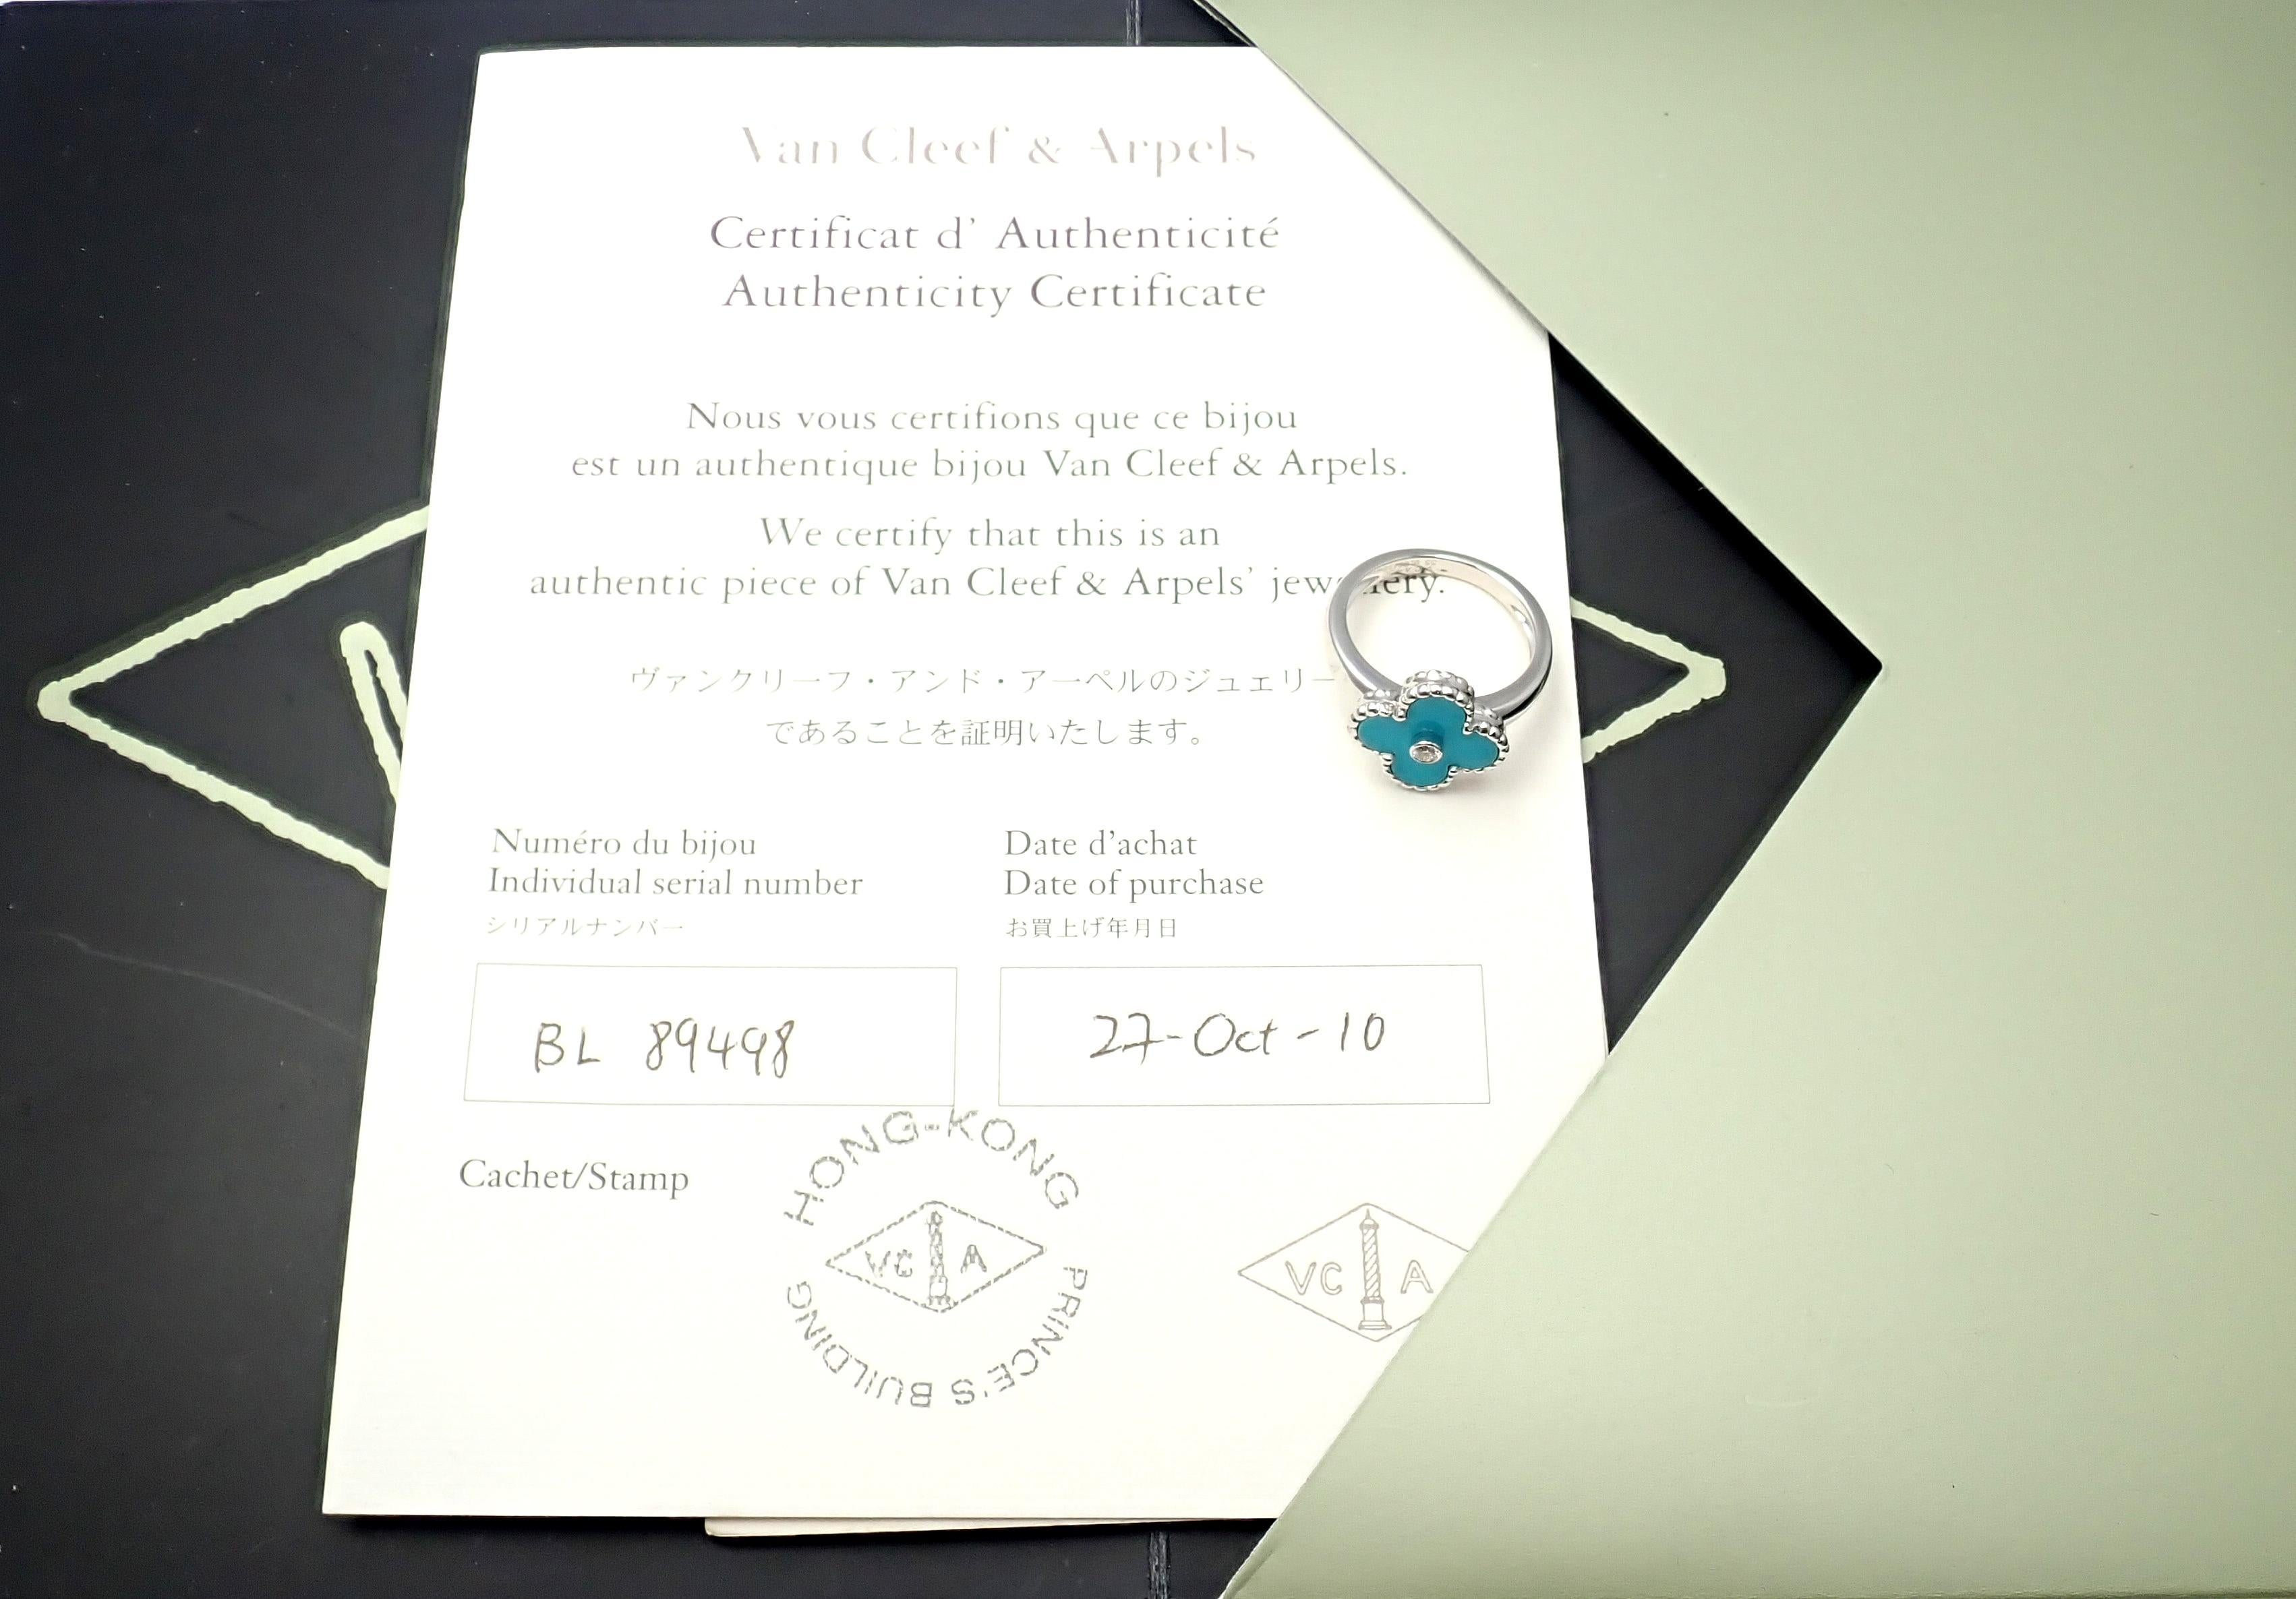 Van Cleef & Arpels Vintage Alhambra 18k White Gold Diamond Turquoise Ring.
With 1 Round brilliant cut diamond .06ct F/VS1
Alhambra cut turquoise.
This ring comes with certificate of authenticity from Van Cleef & Arpels store.
Details:
Size: European